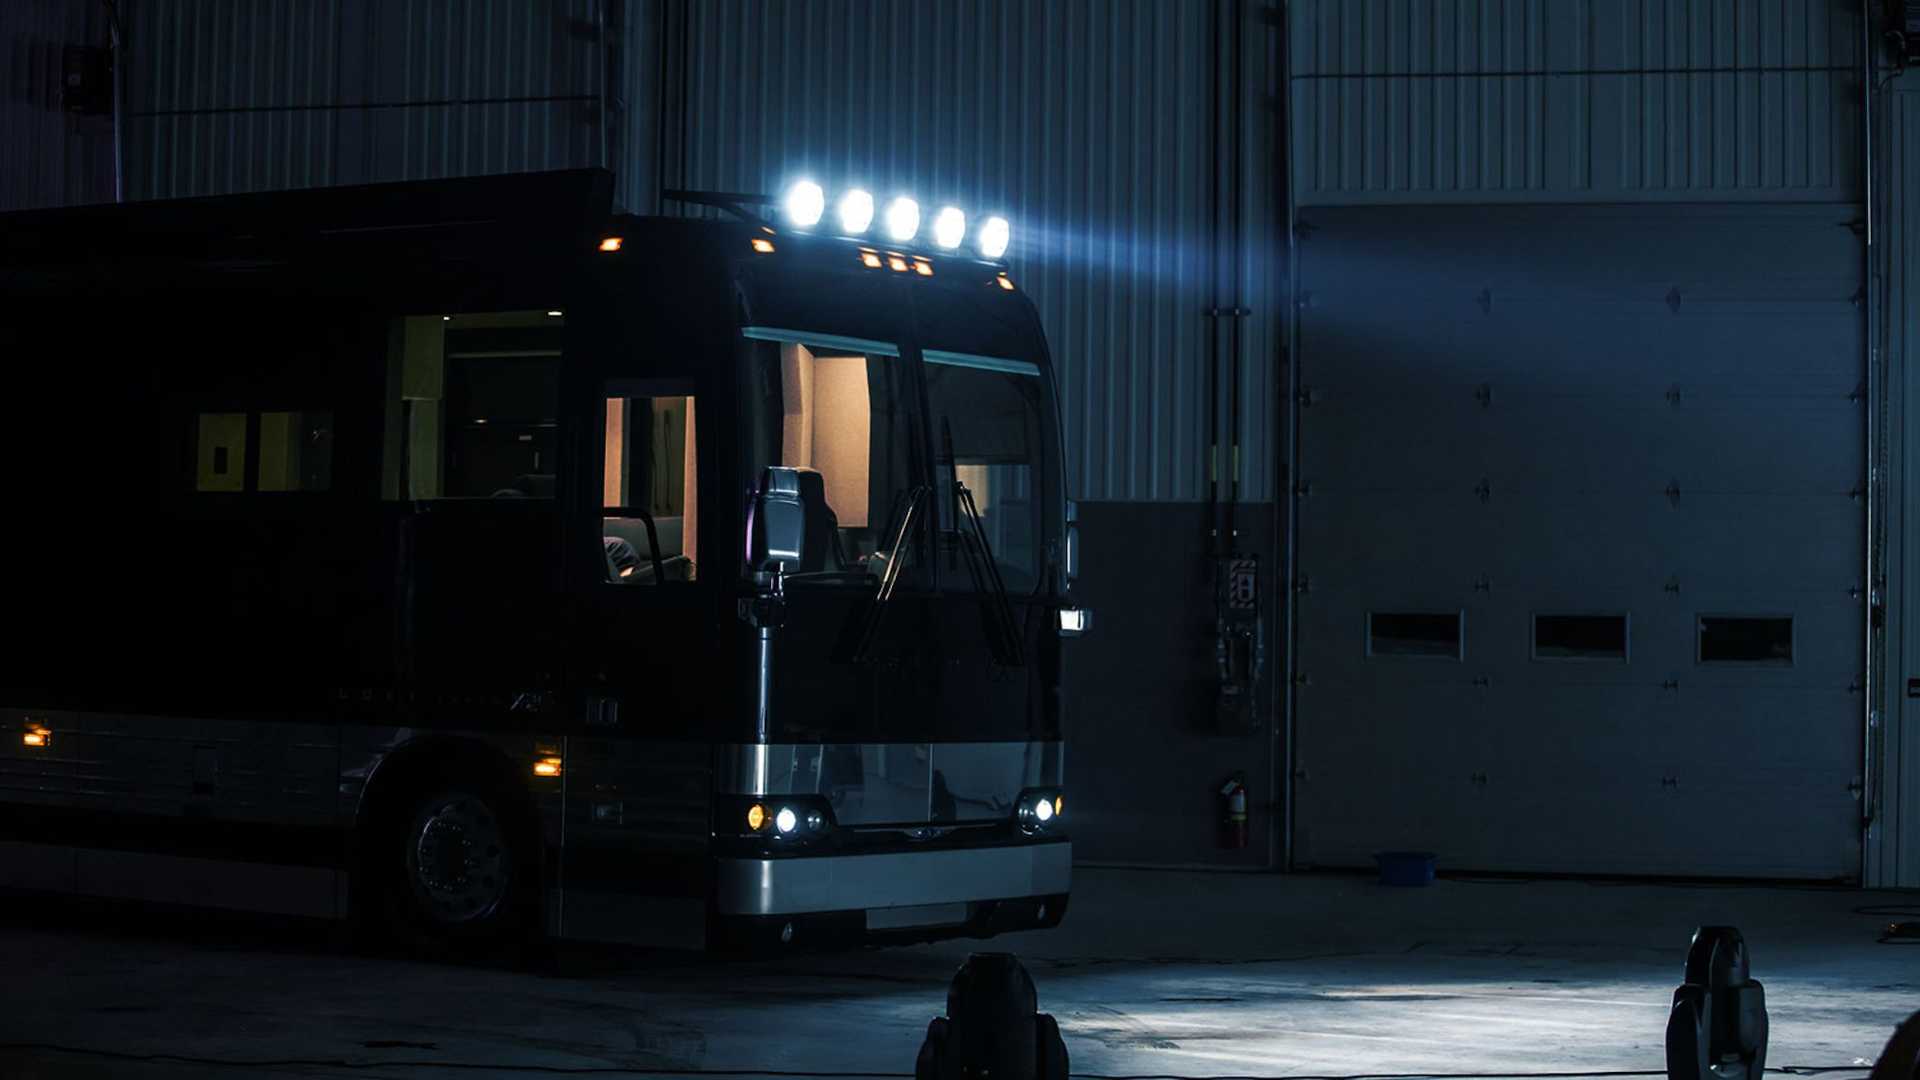 This Massive Prevost RV Sets the ‘Off-Road Life’ in a Cozy Lap of Luxury